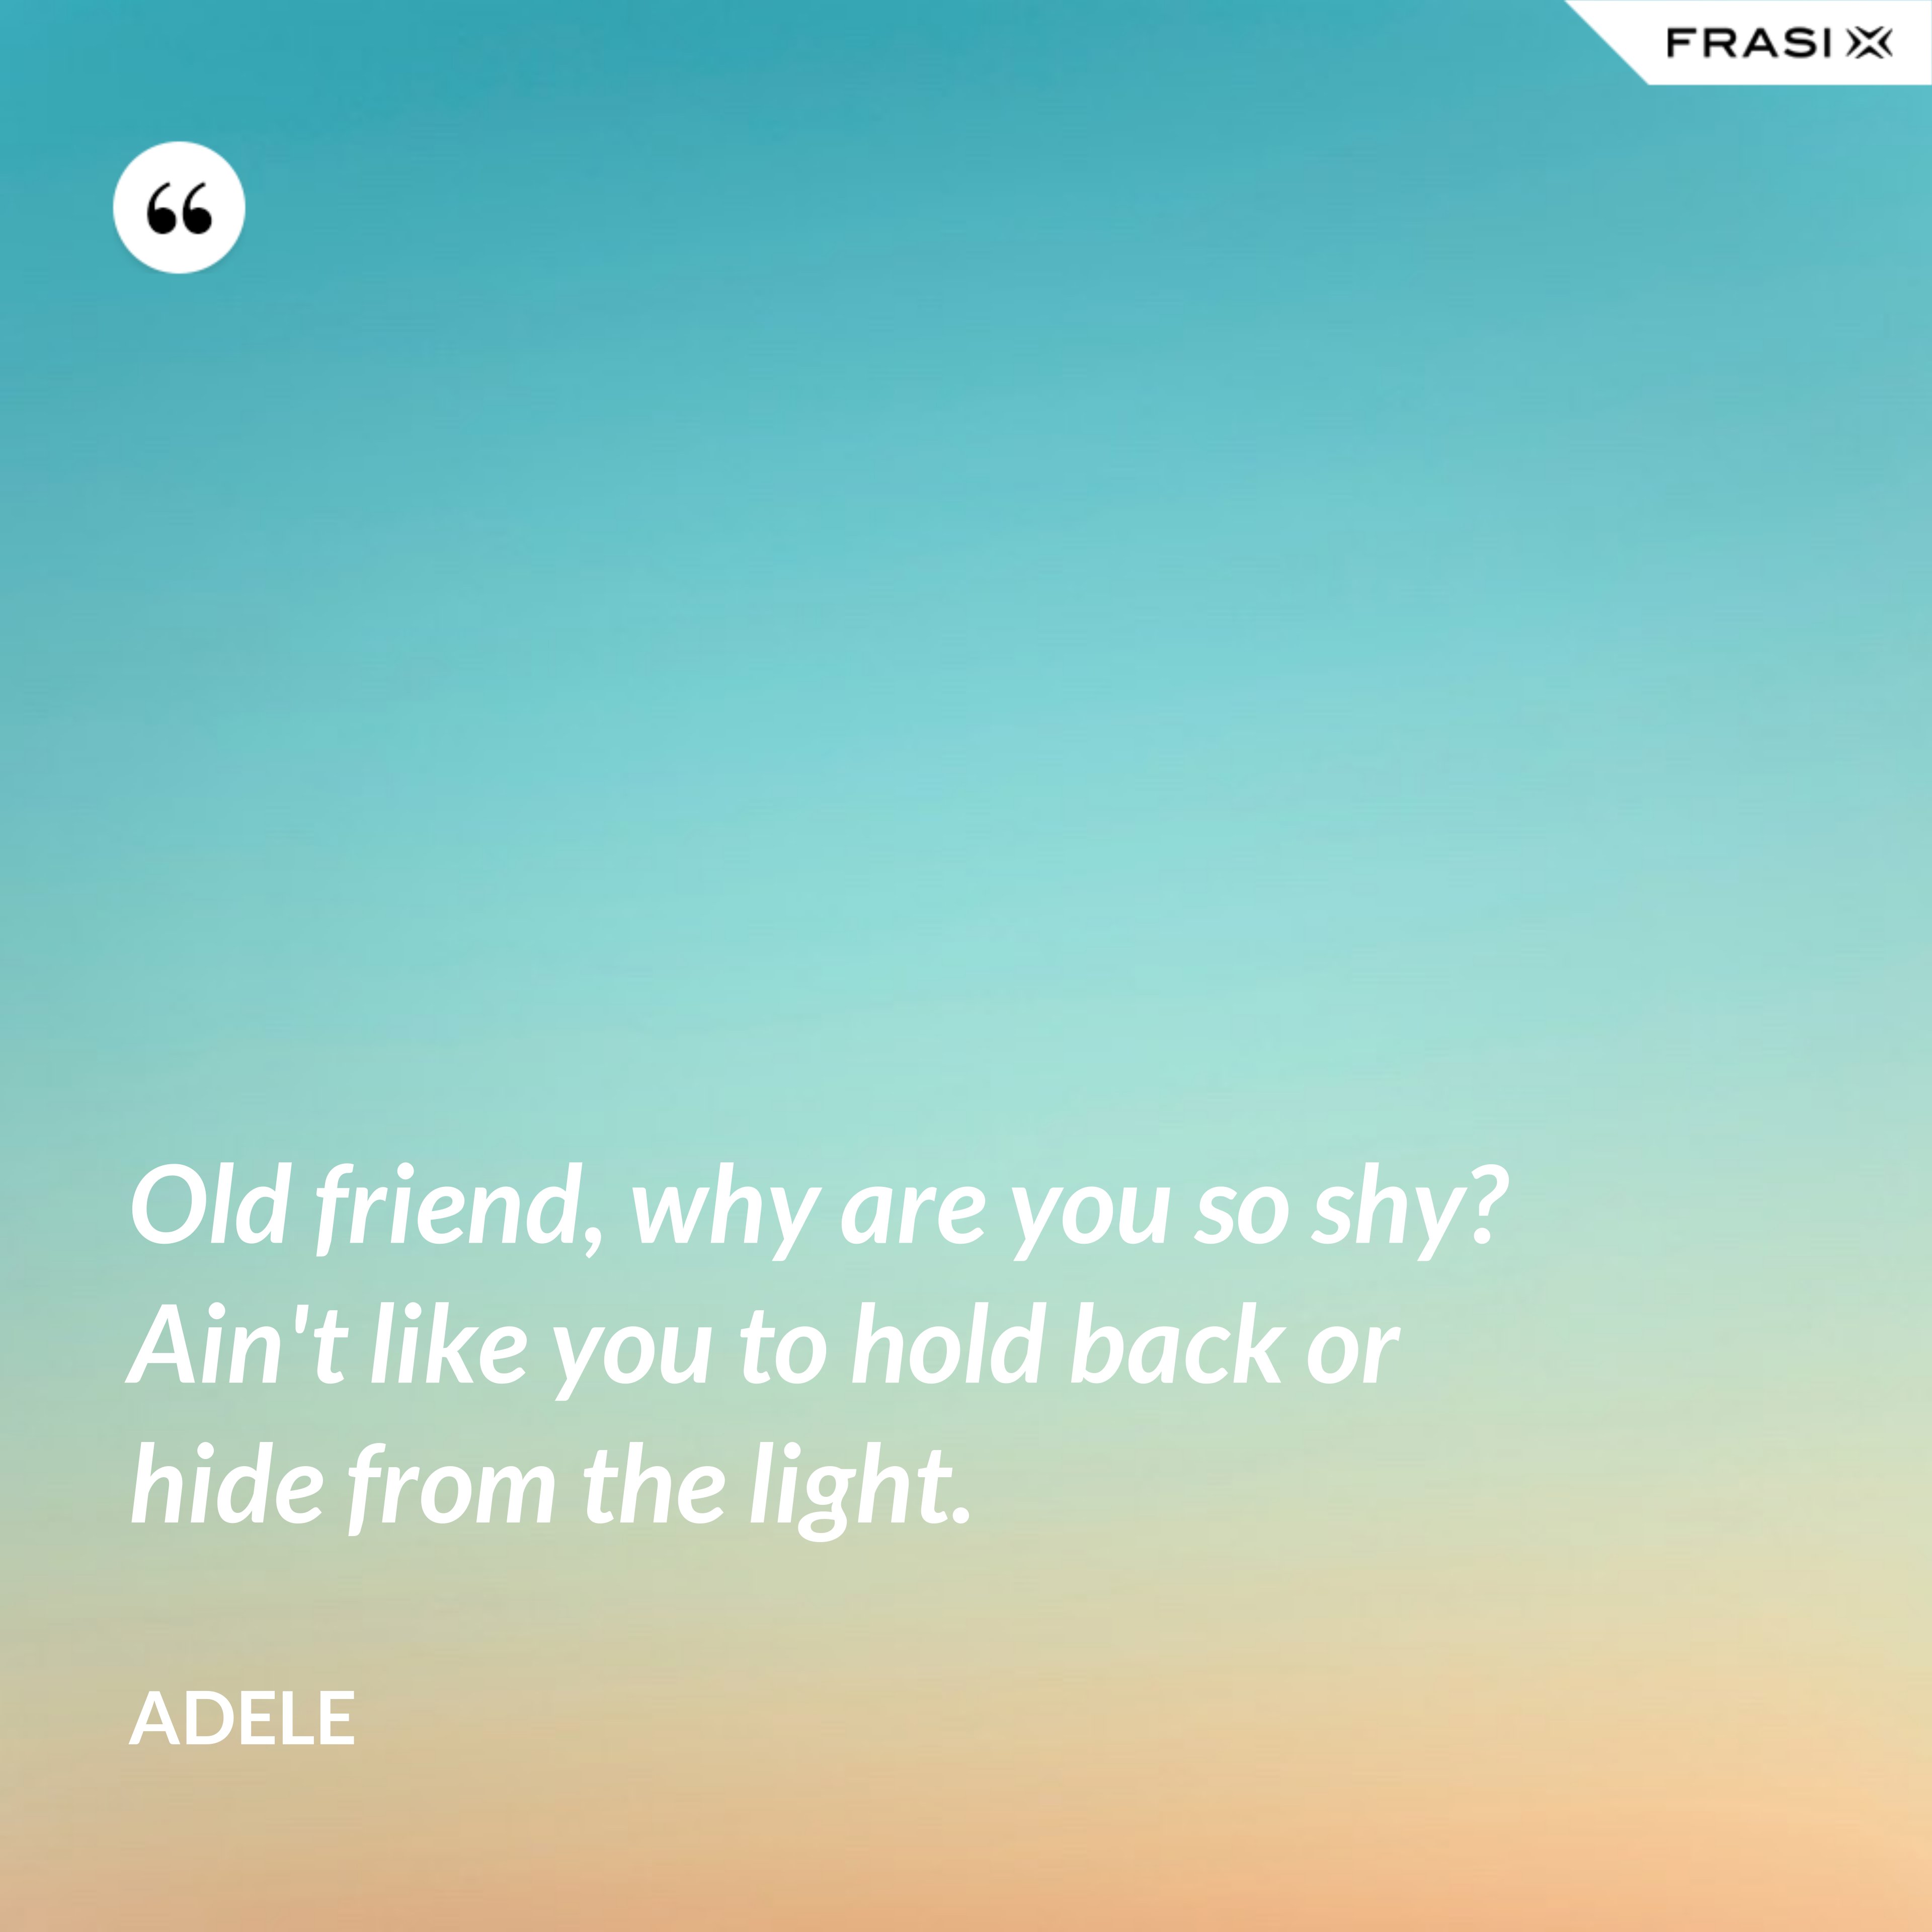 Old friend, why are you so shy? Ain't like you to hold back or hide from the light. - Adele